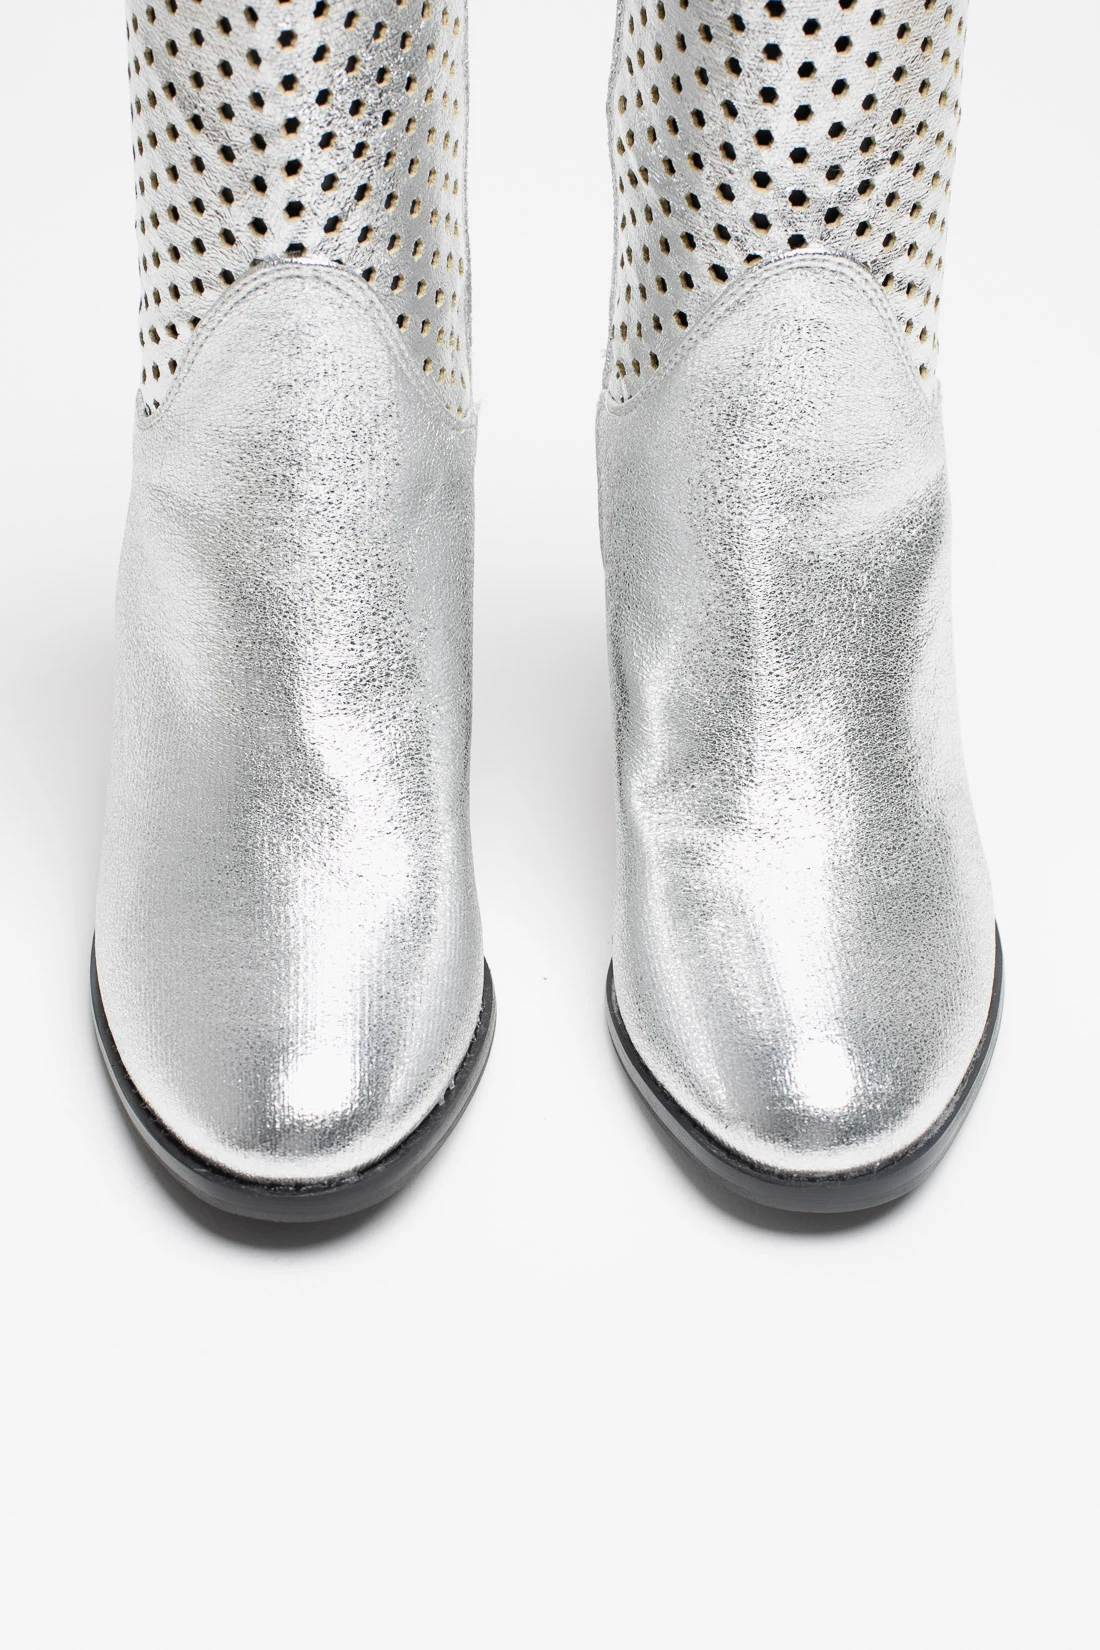 LOW BOOT COURA - SILVER